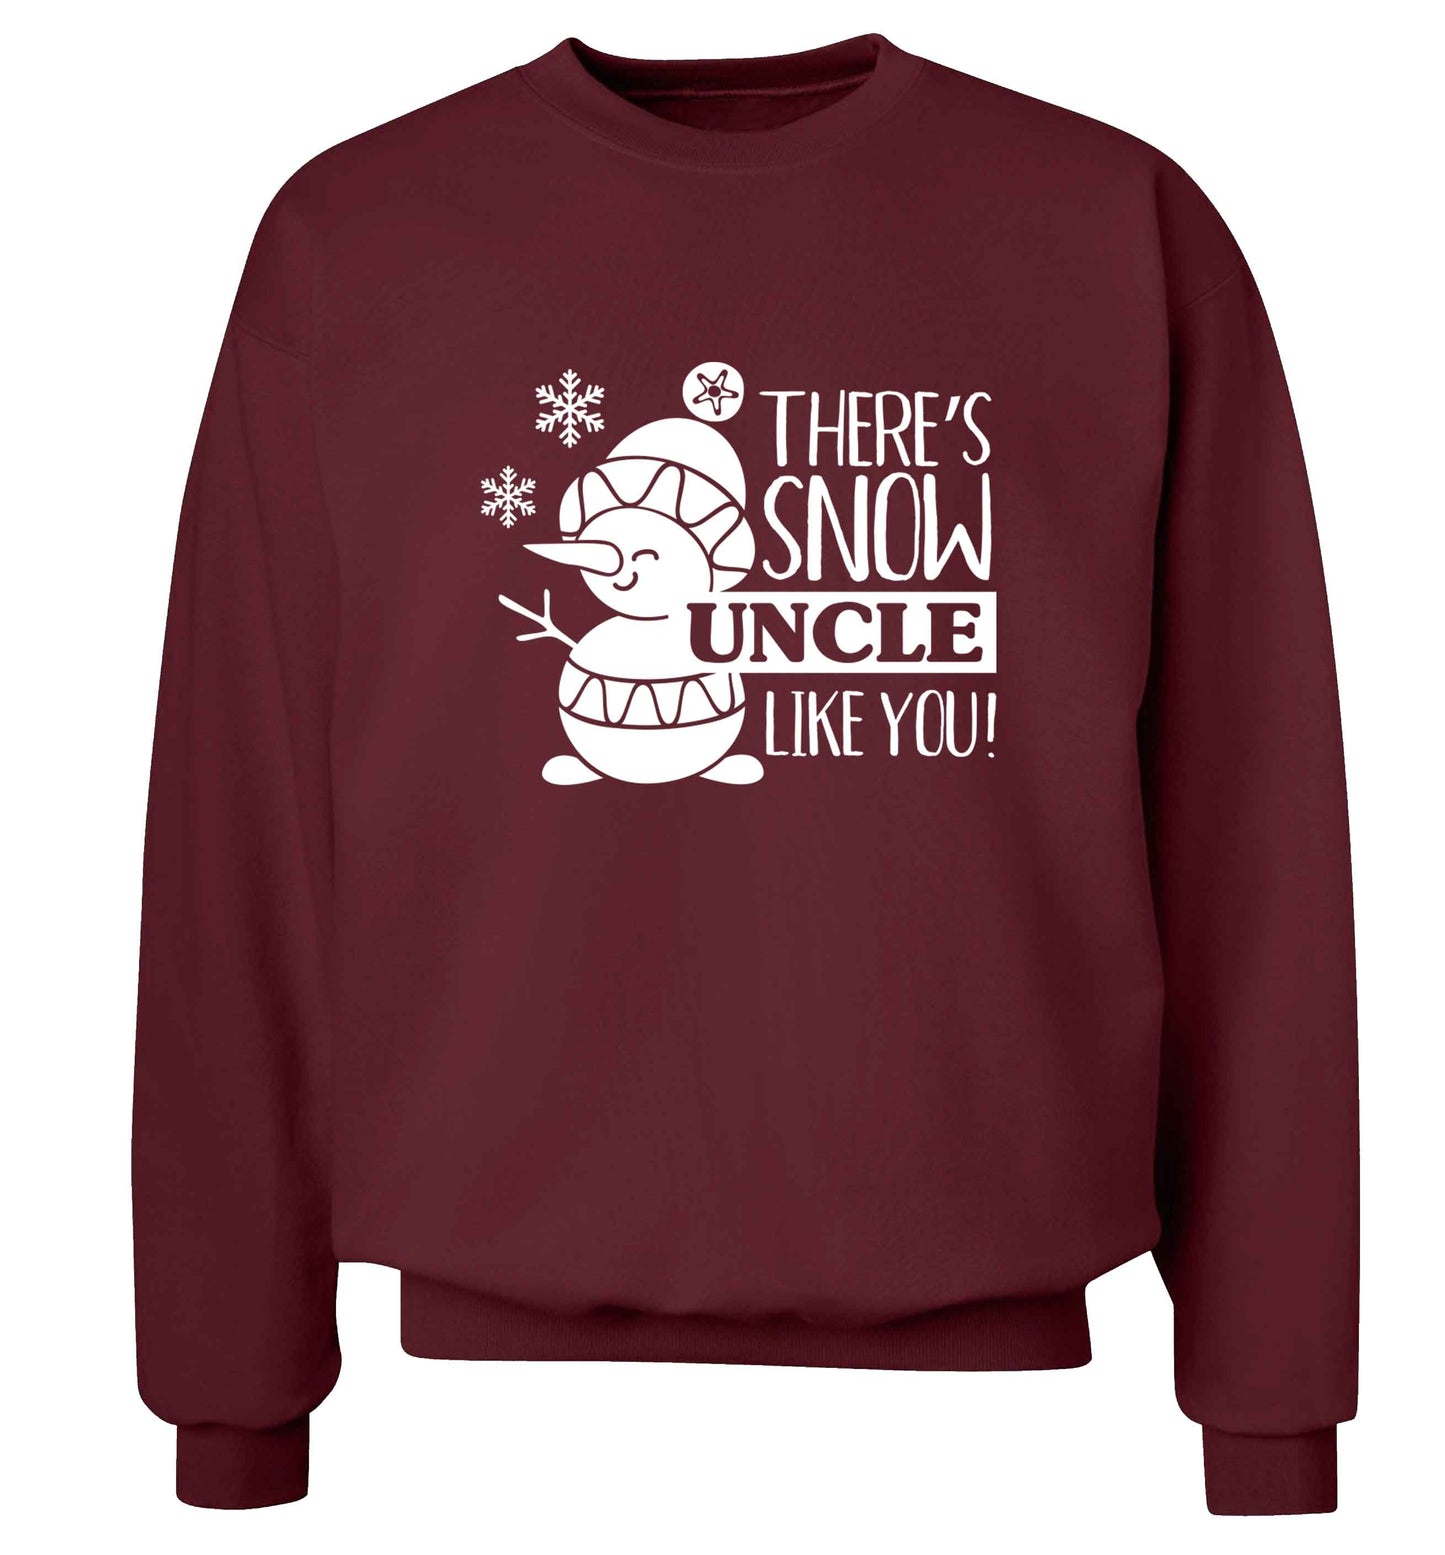 There's snow uncle like you adult's unisex maroon sweater 2XL